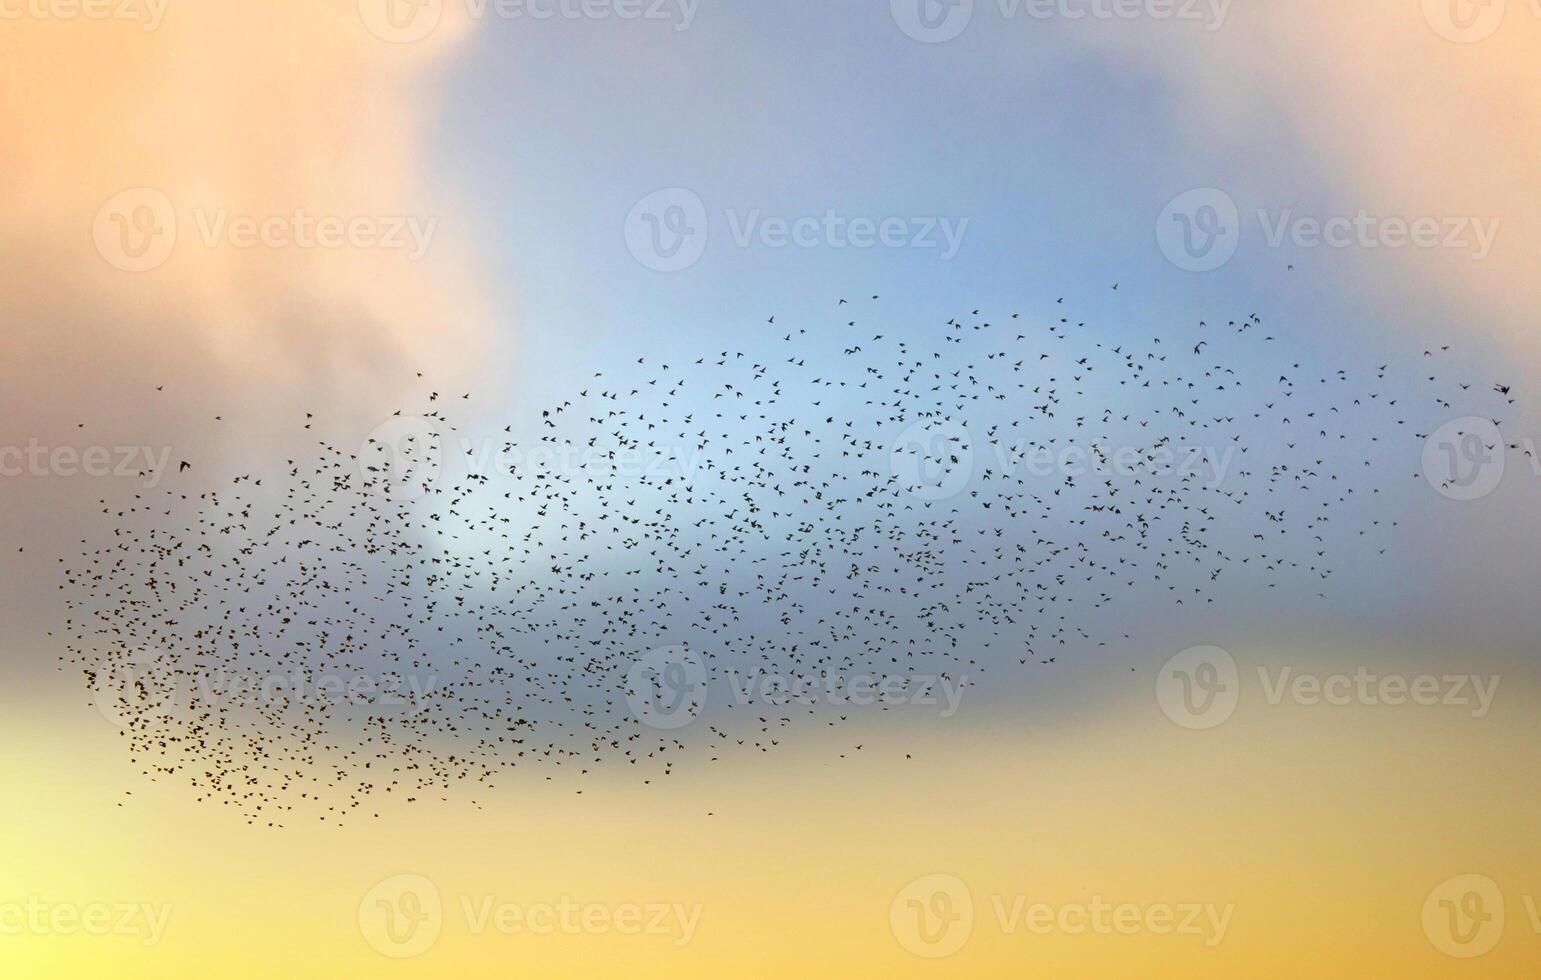 A flock of birds migrating in the sky at sunset. Representation of freedom themed photo